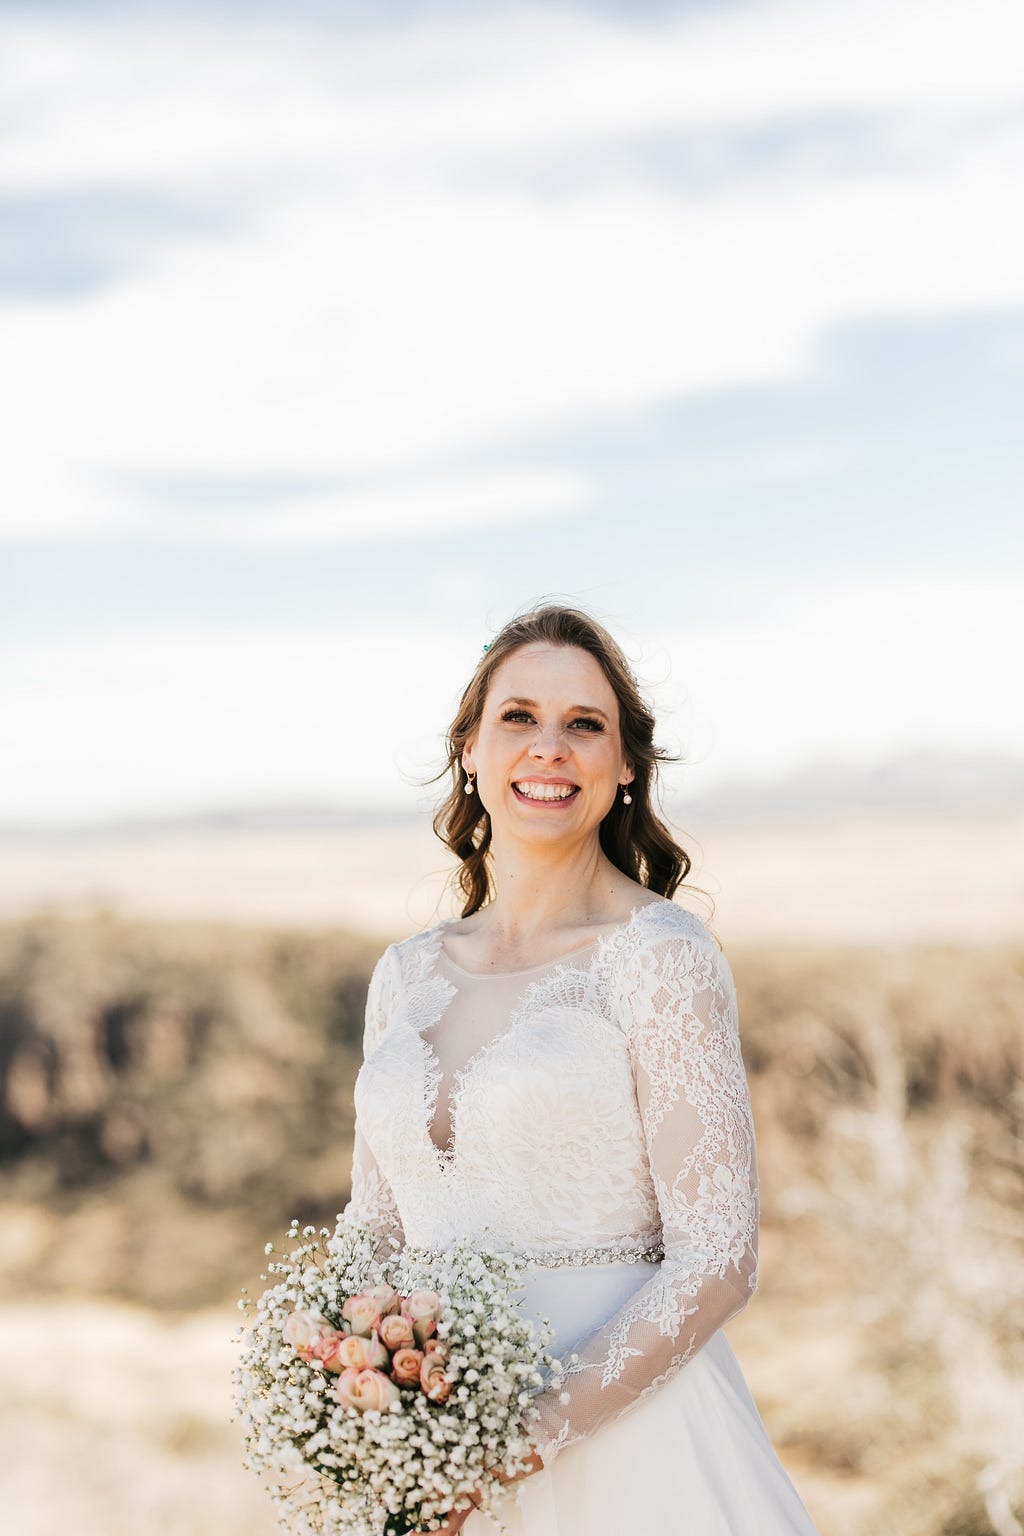 Picture of smiling bride (the author) in a white lace wedding dress with a faded scenery of a desert landscape behind her.